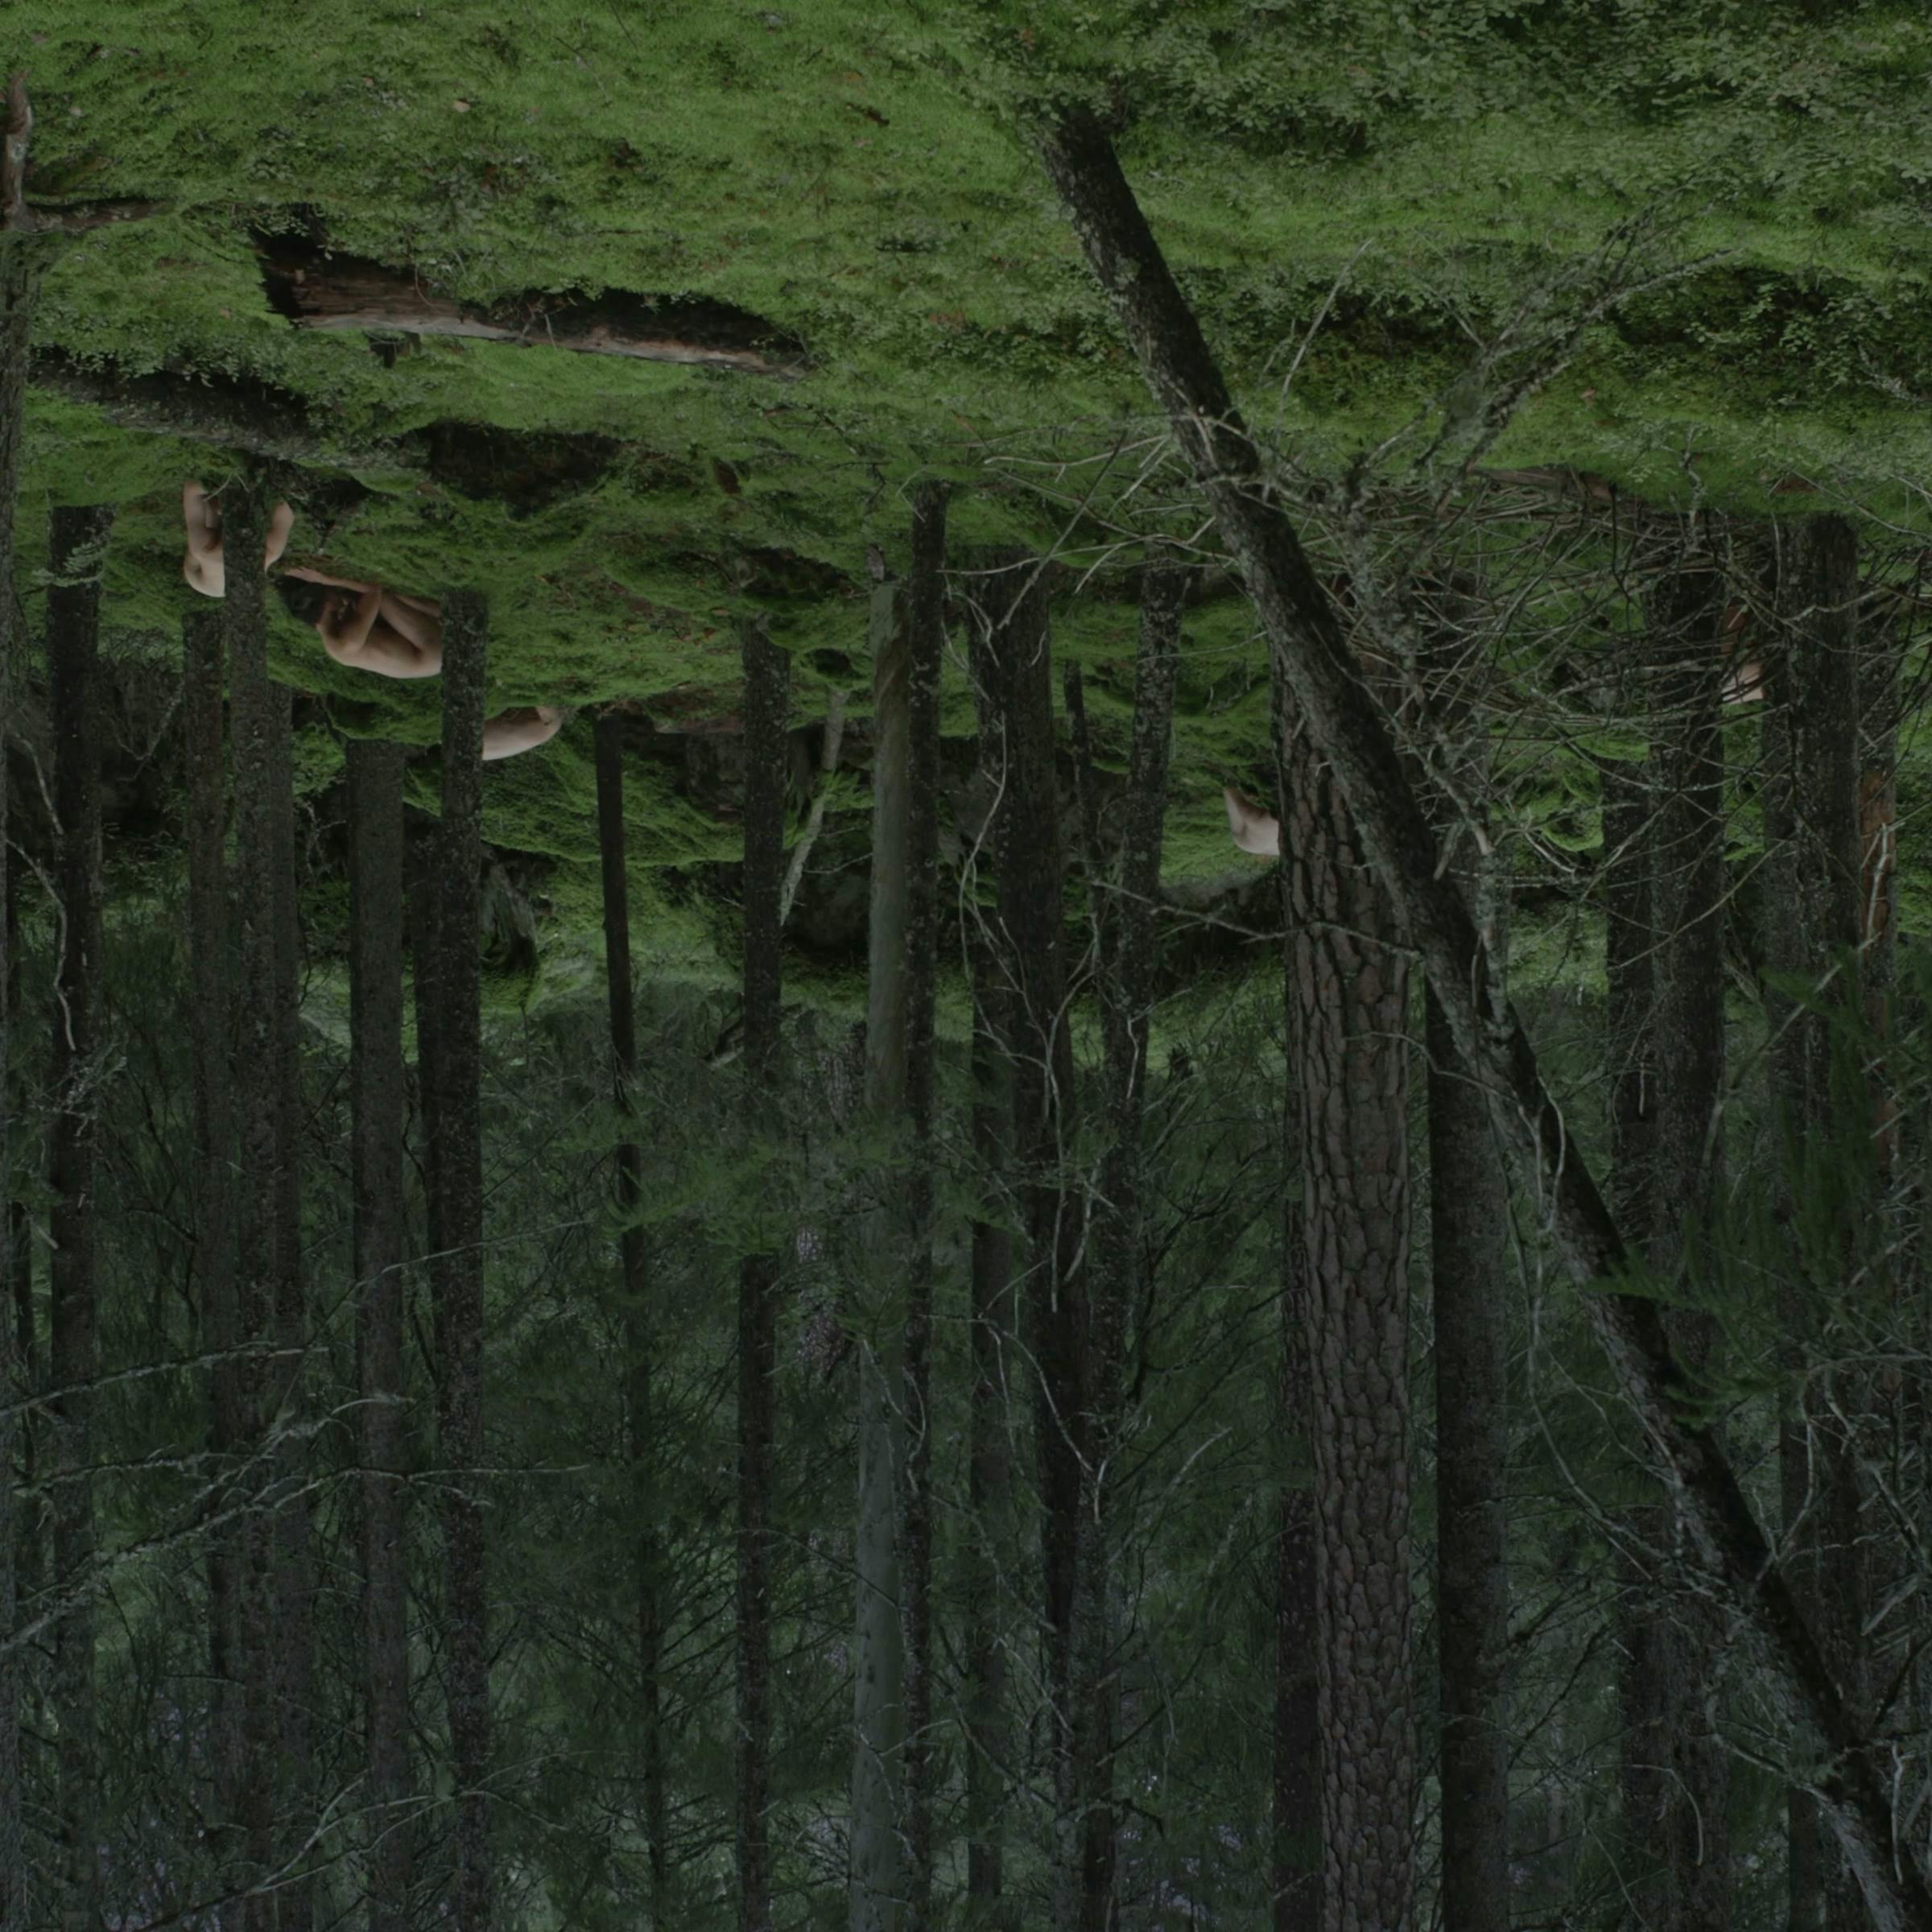 an upside down image of a lush forest. We can see one naked person in the distance